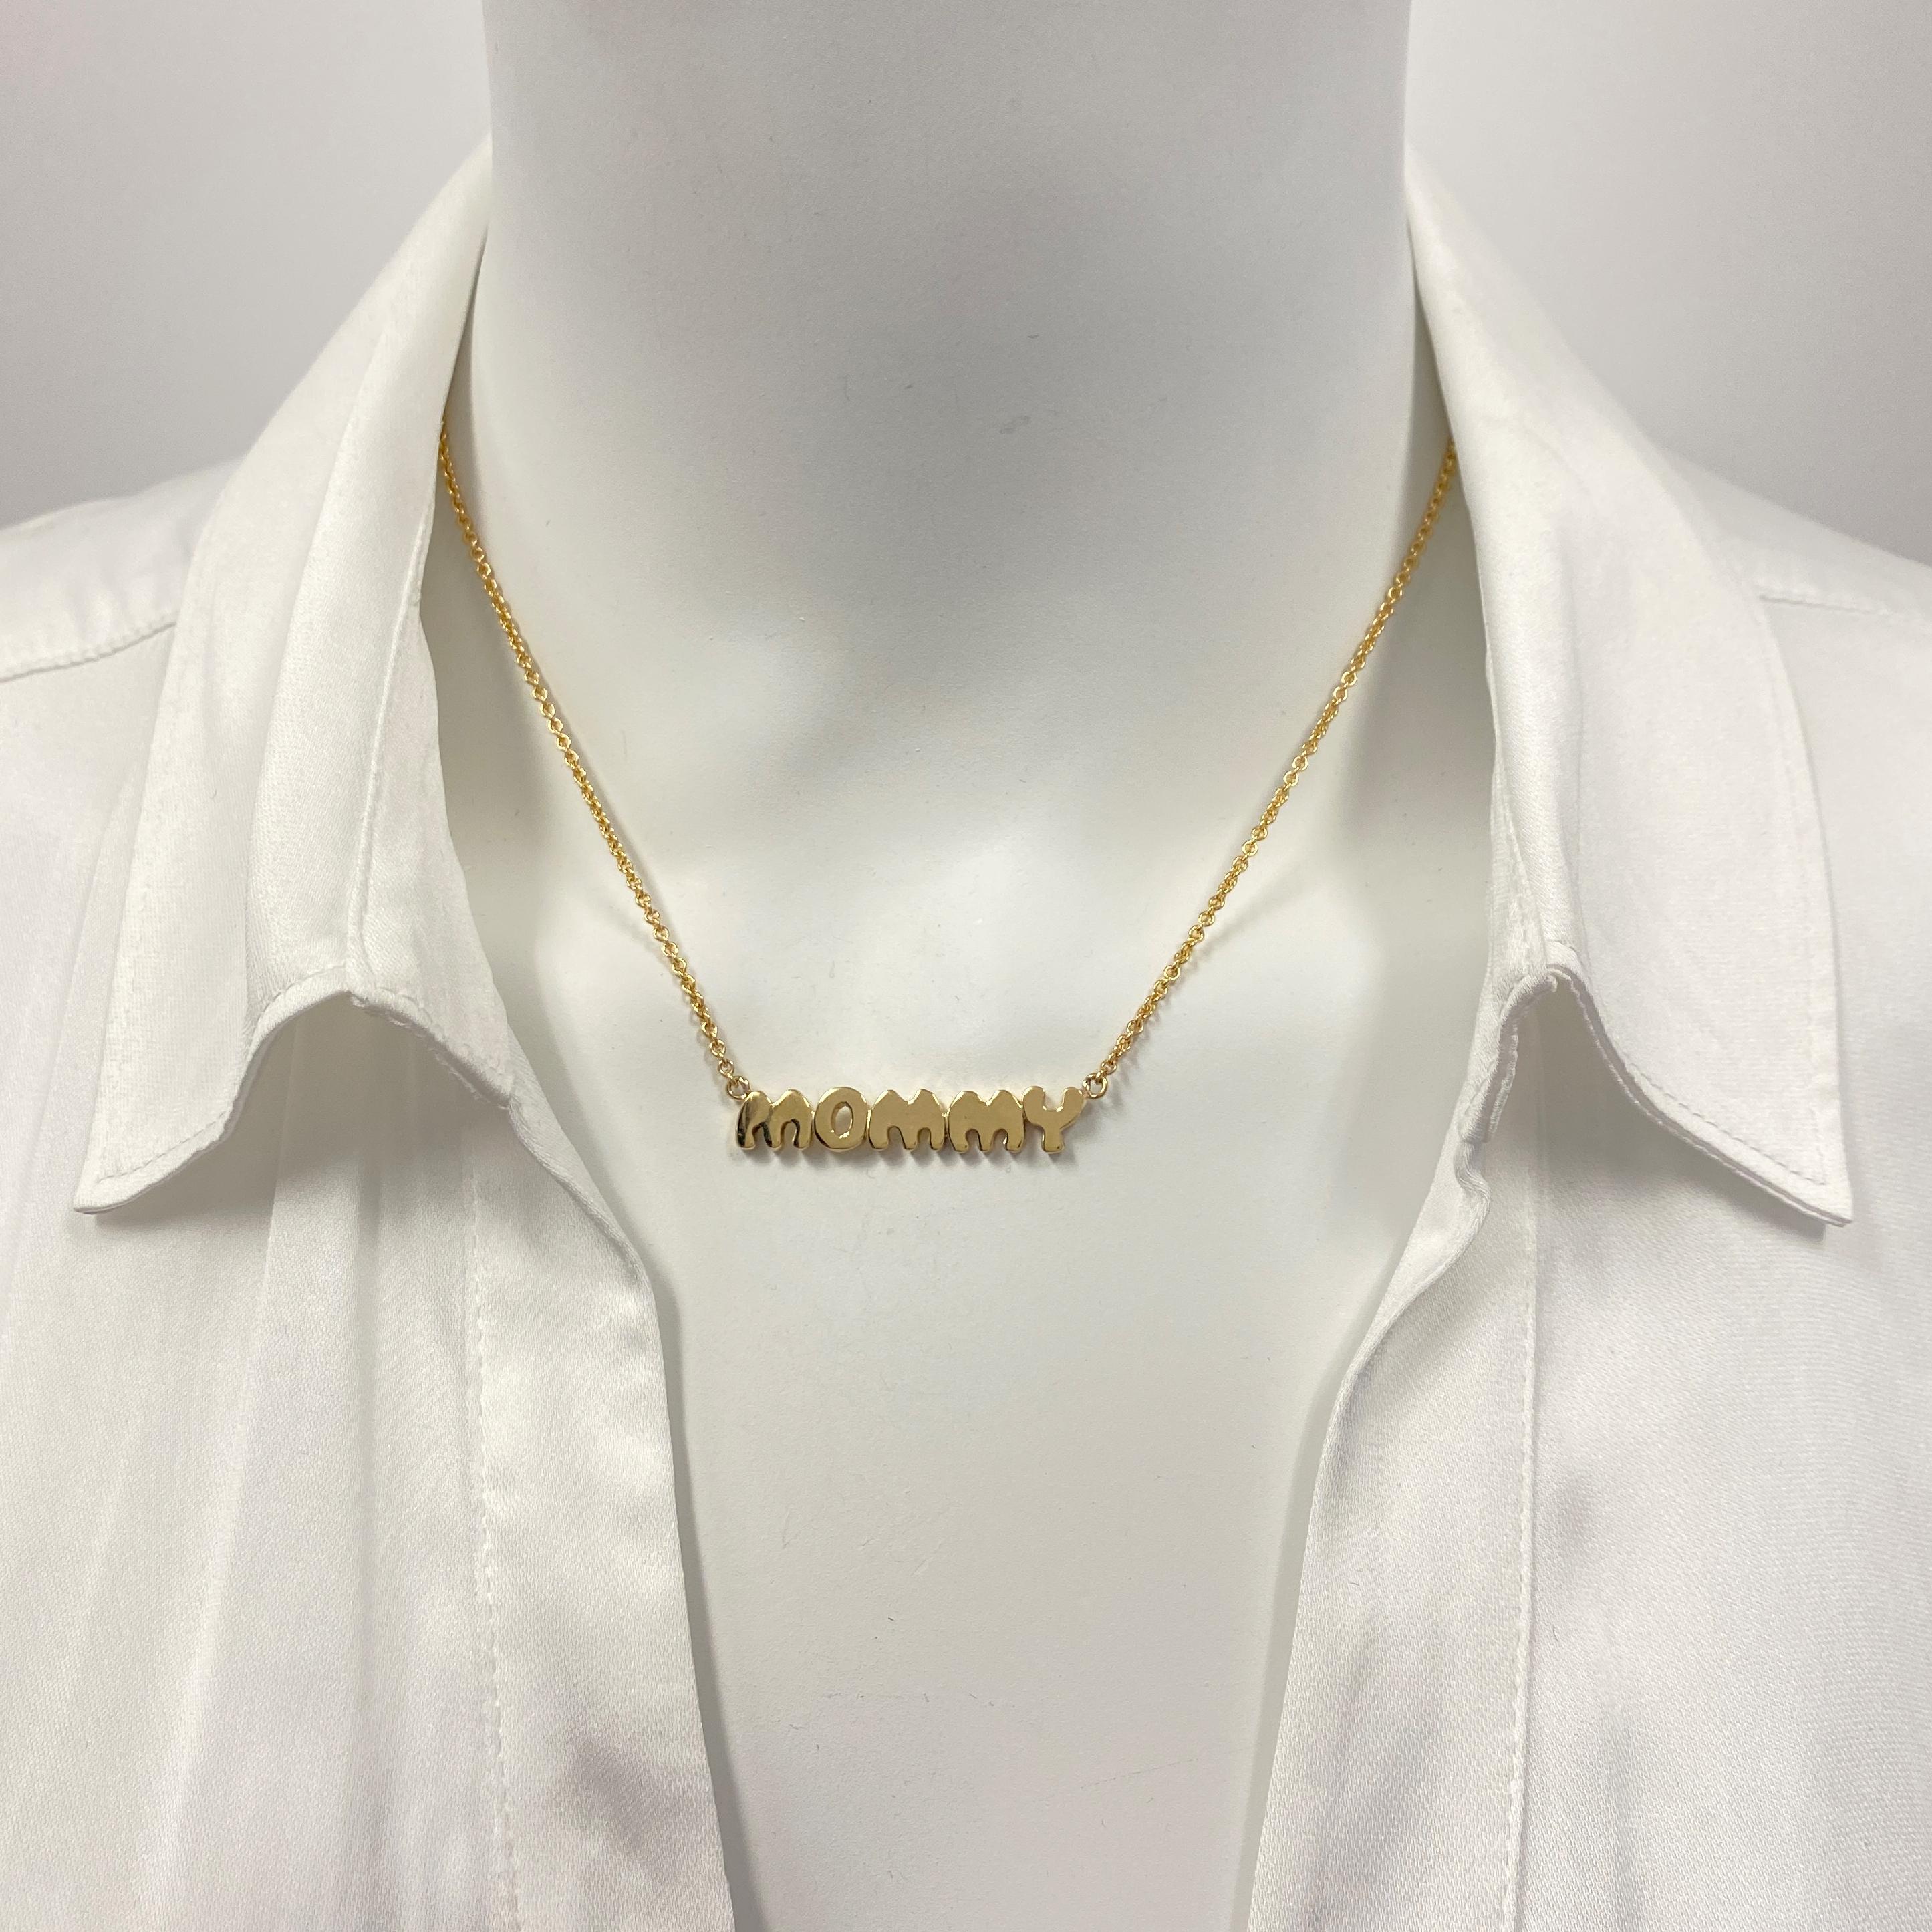 A chunky, cheerful nameplate necklace by Eytan Brandes starring a name shared and cherished by so many.  

Length: 16